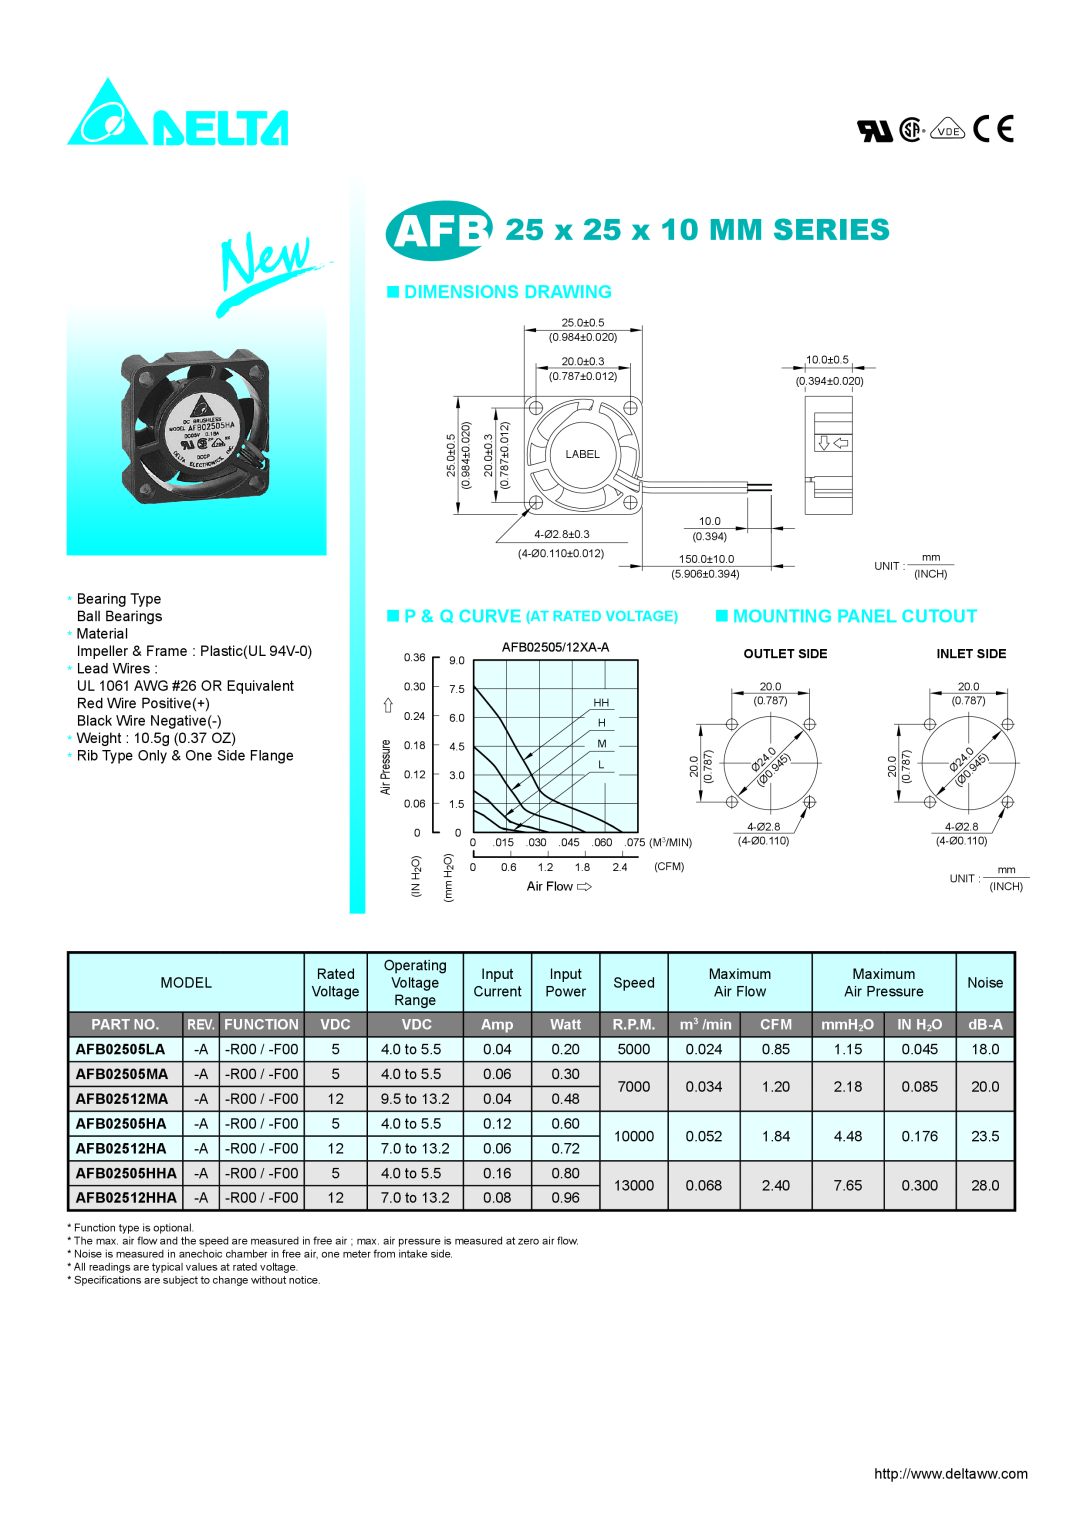 Delta Electronics AFB Series dimensions AFB 25 x 25 x 10 MM SERIES, Dimensions Drawing, Function, R.P.M, IN H2O 